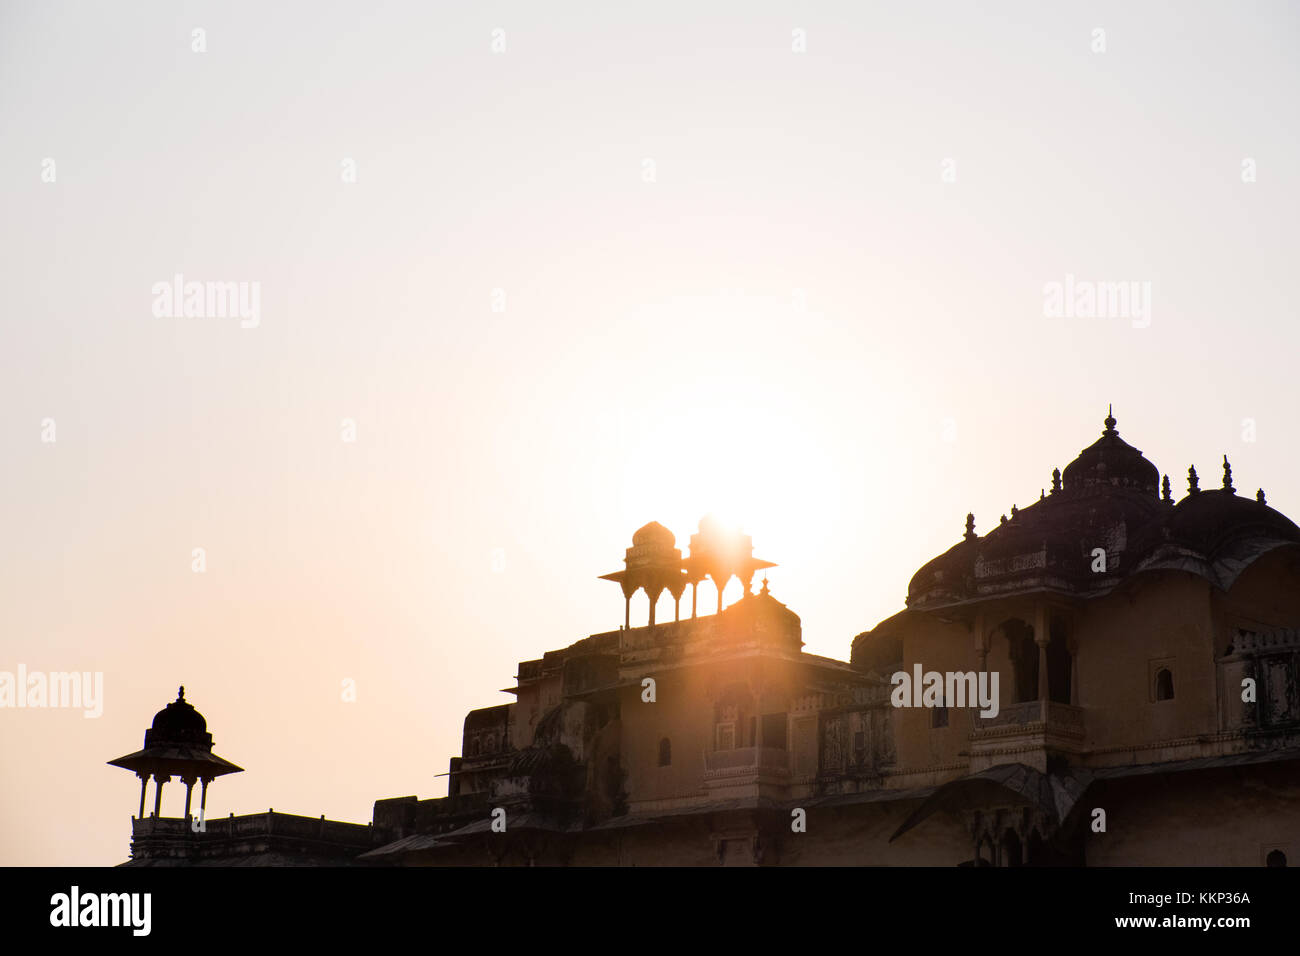 Turrets and cupolas of an Indian Palace aginst a sunset, Bundi, Rajasthan,India Stock Photo